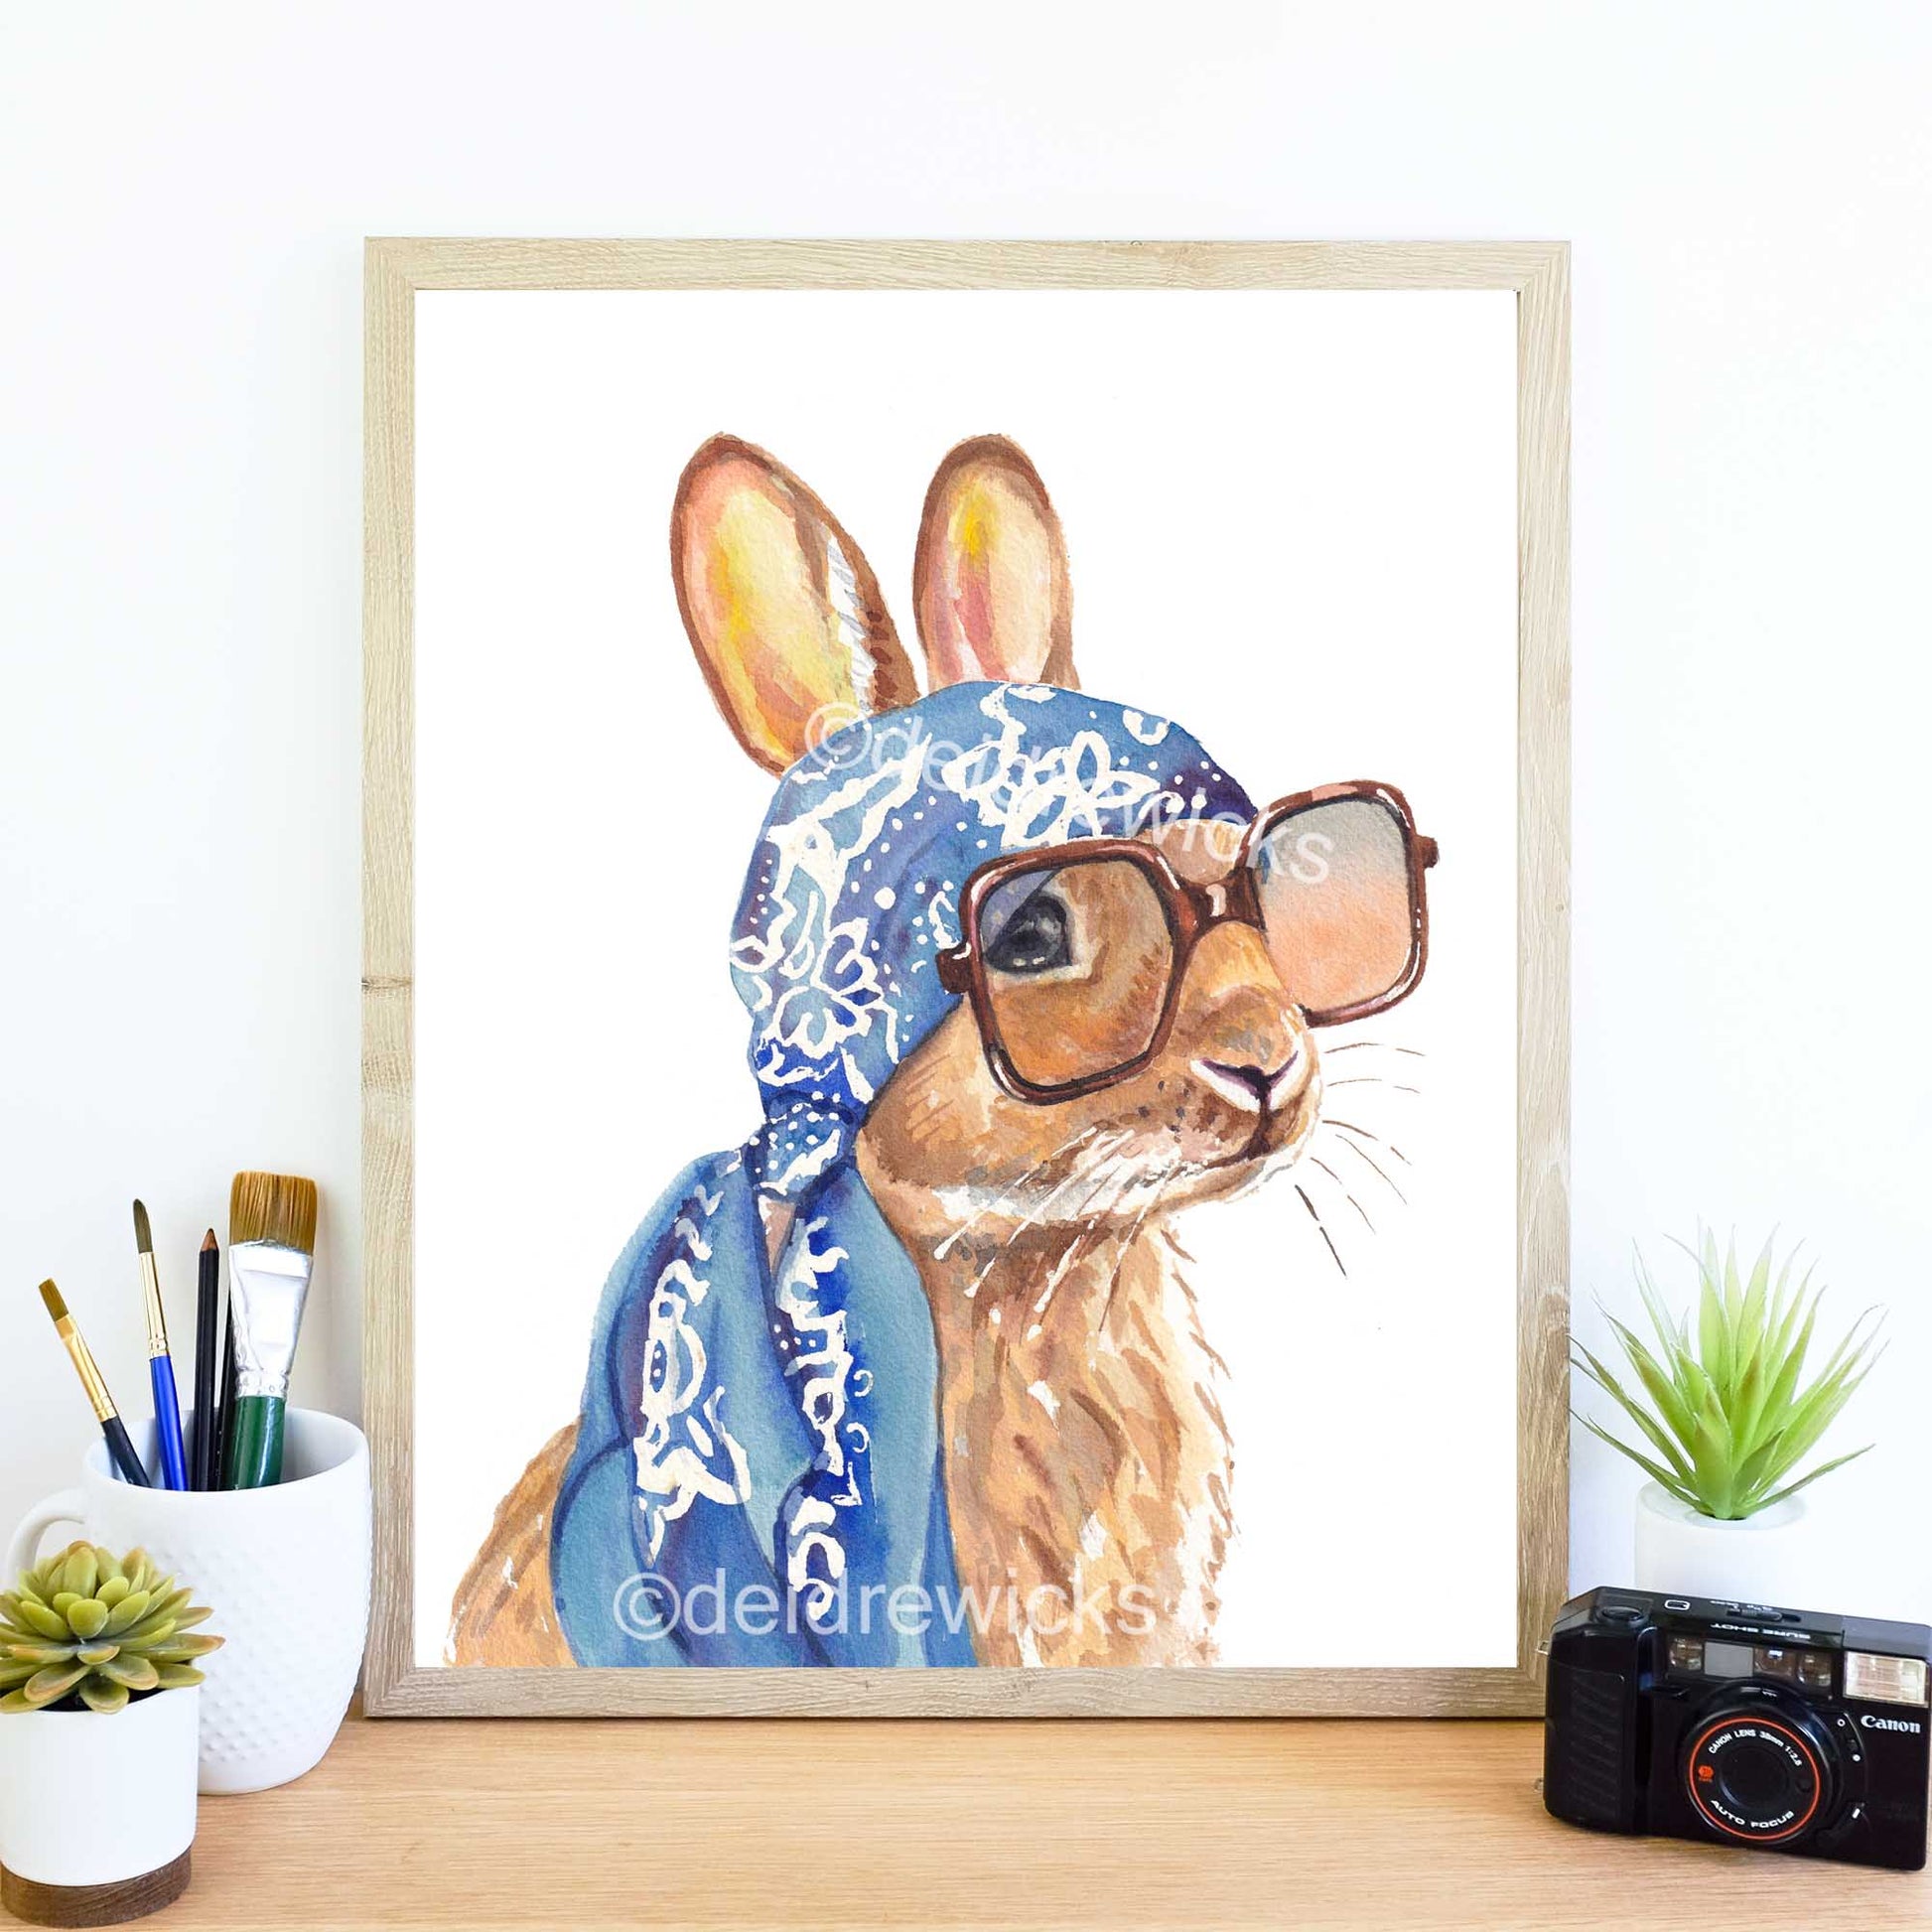 Framed example of a watercolour painting of a brown bunny rabbit wearing a vintage scarf and big sunglasses. Vacation time! Art by Deidre Wicks